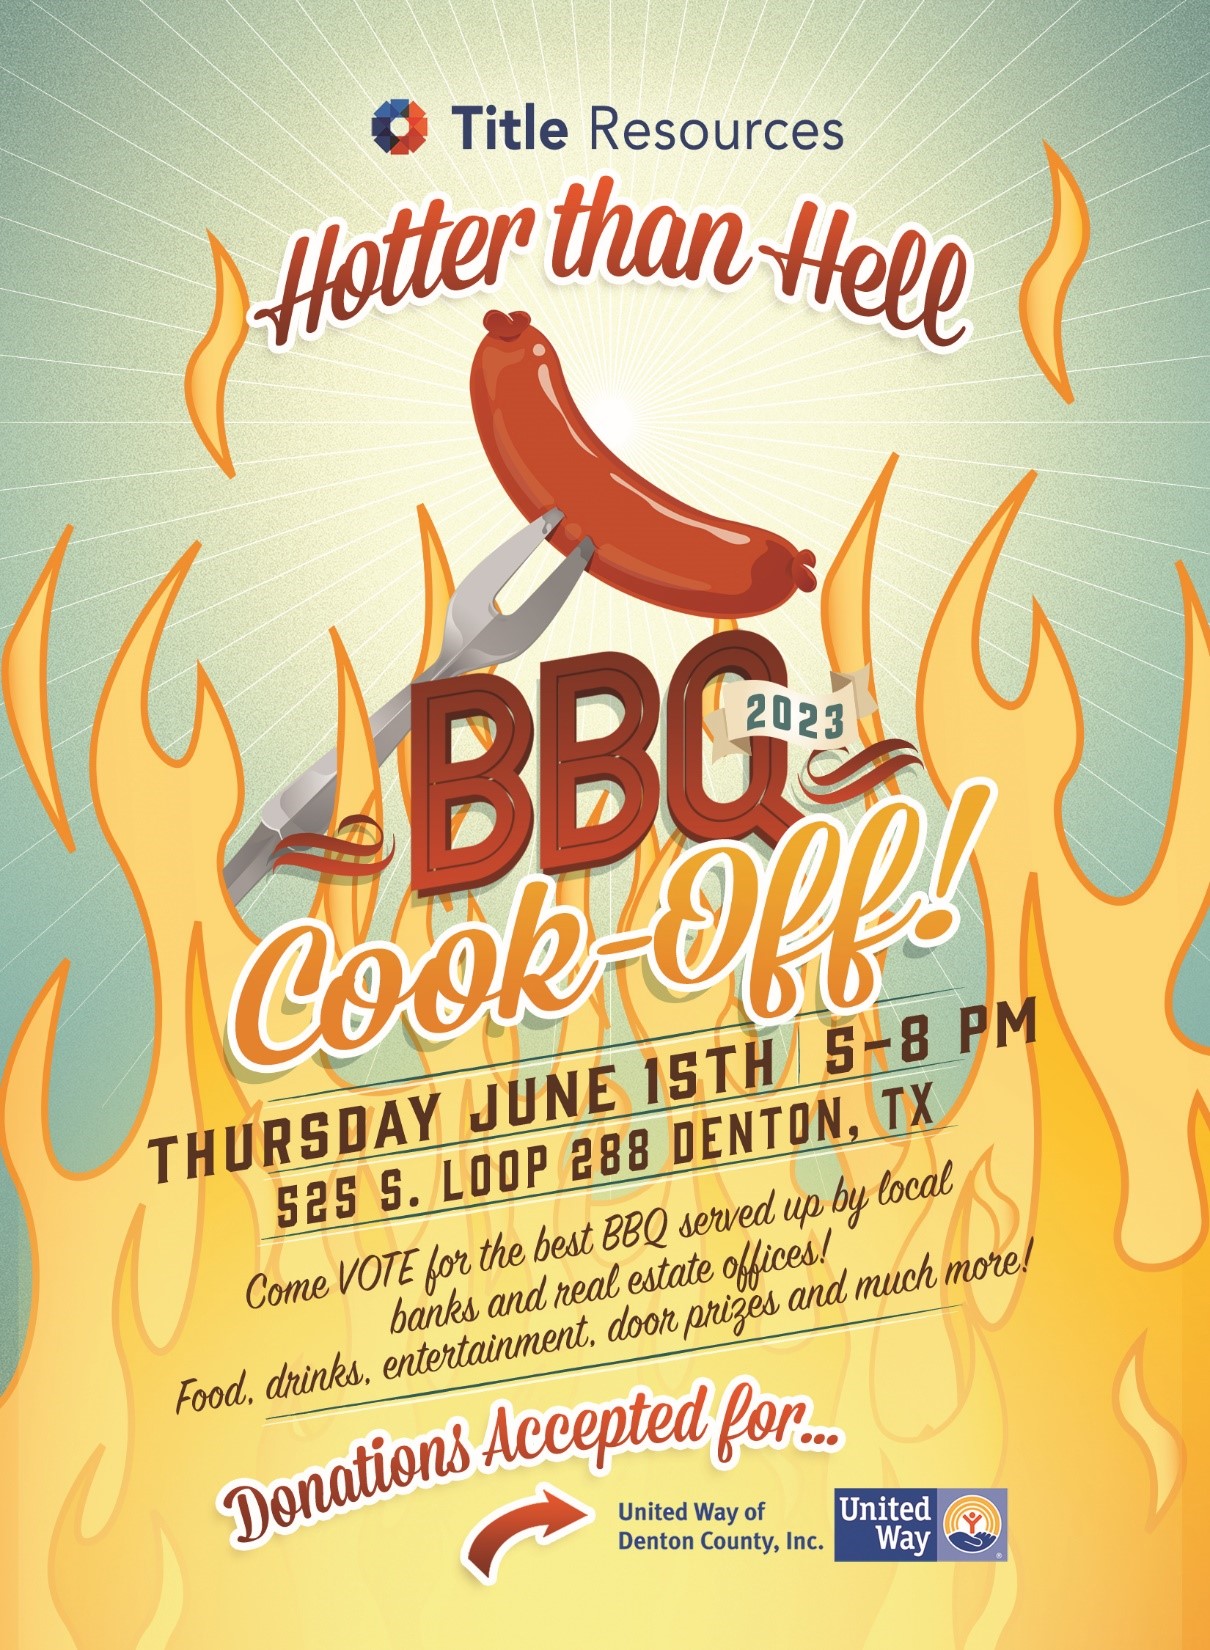 Hotter than Hell BBQ